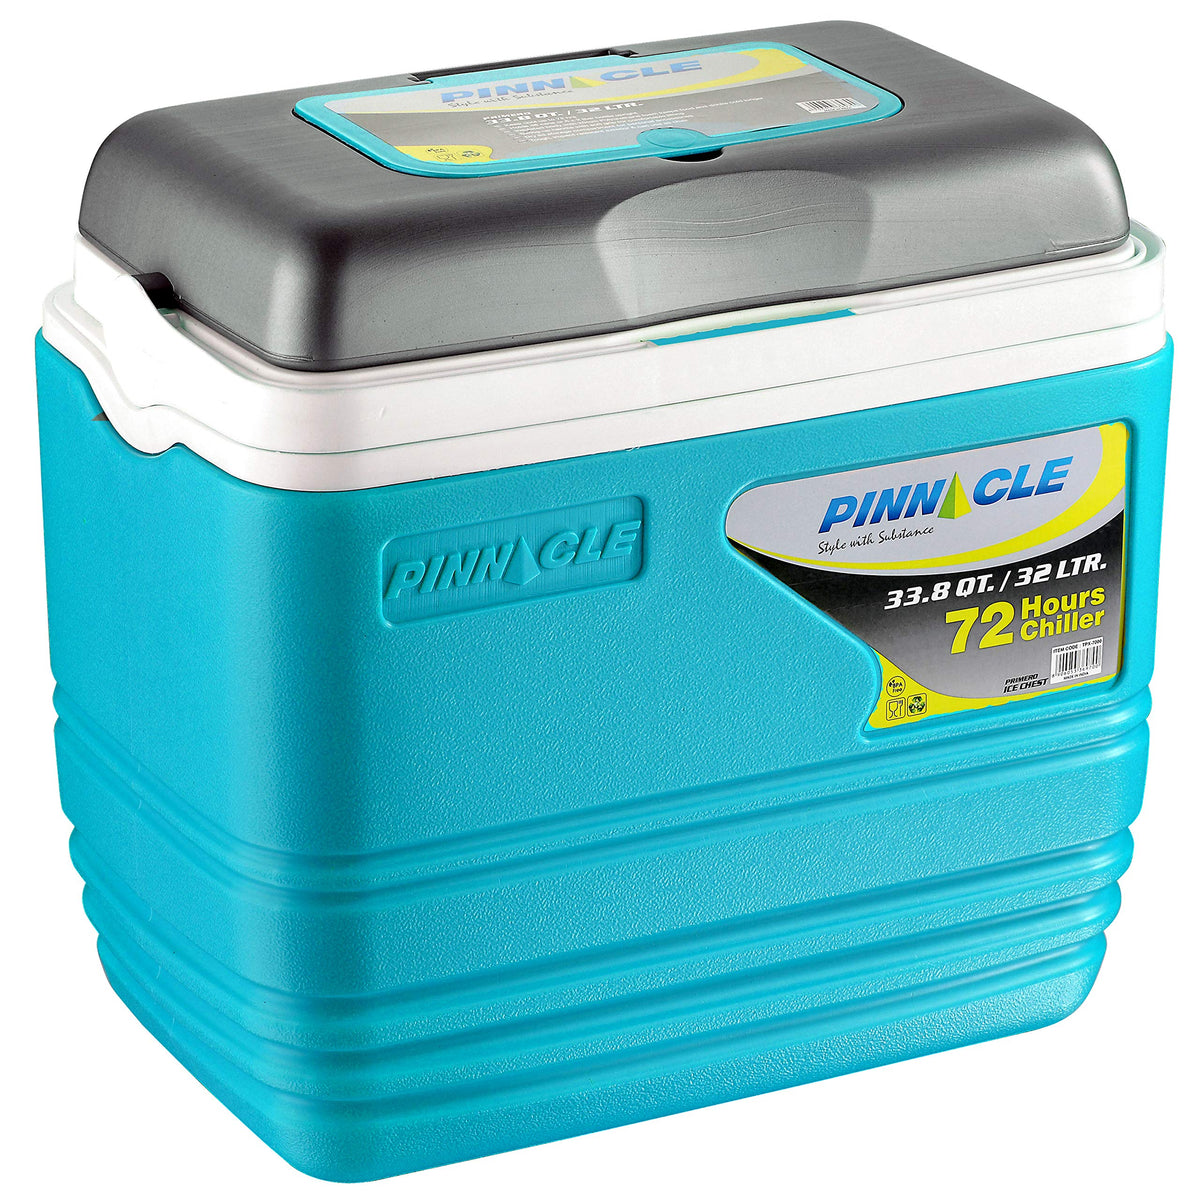 Pinnacle Primero Ice Cooler Box | Keeps Ice Cubes, Cold Drinks Cold Upto 72 Hours | Medical Purpose (32 Litre) (Blue)